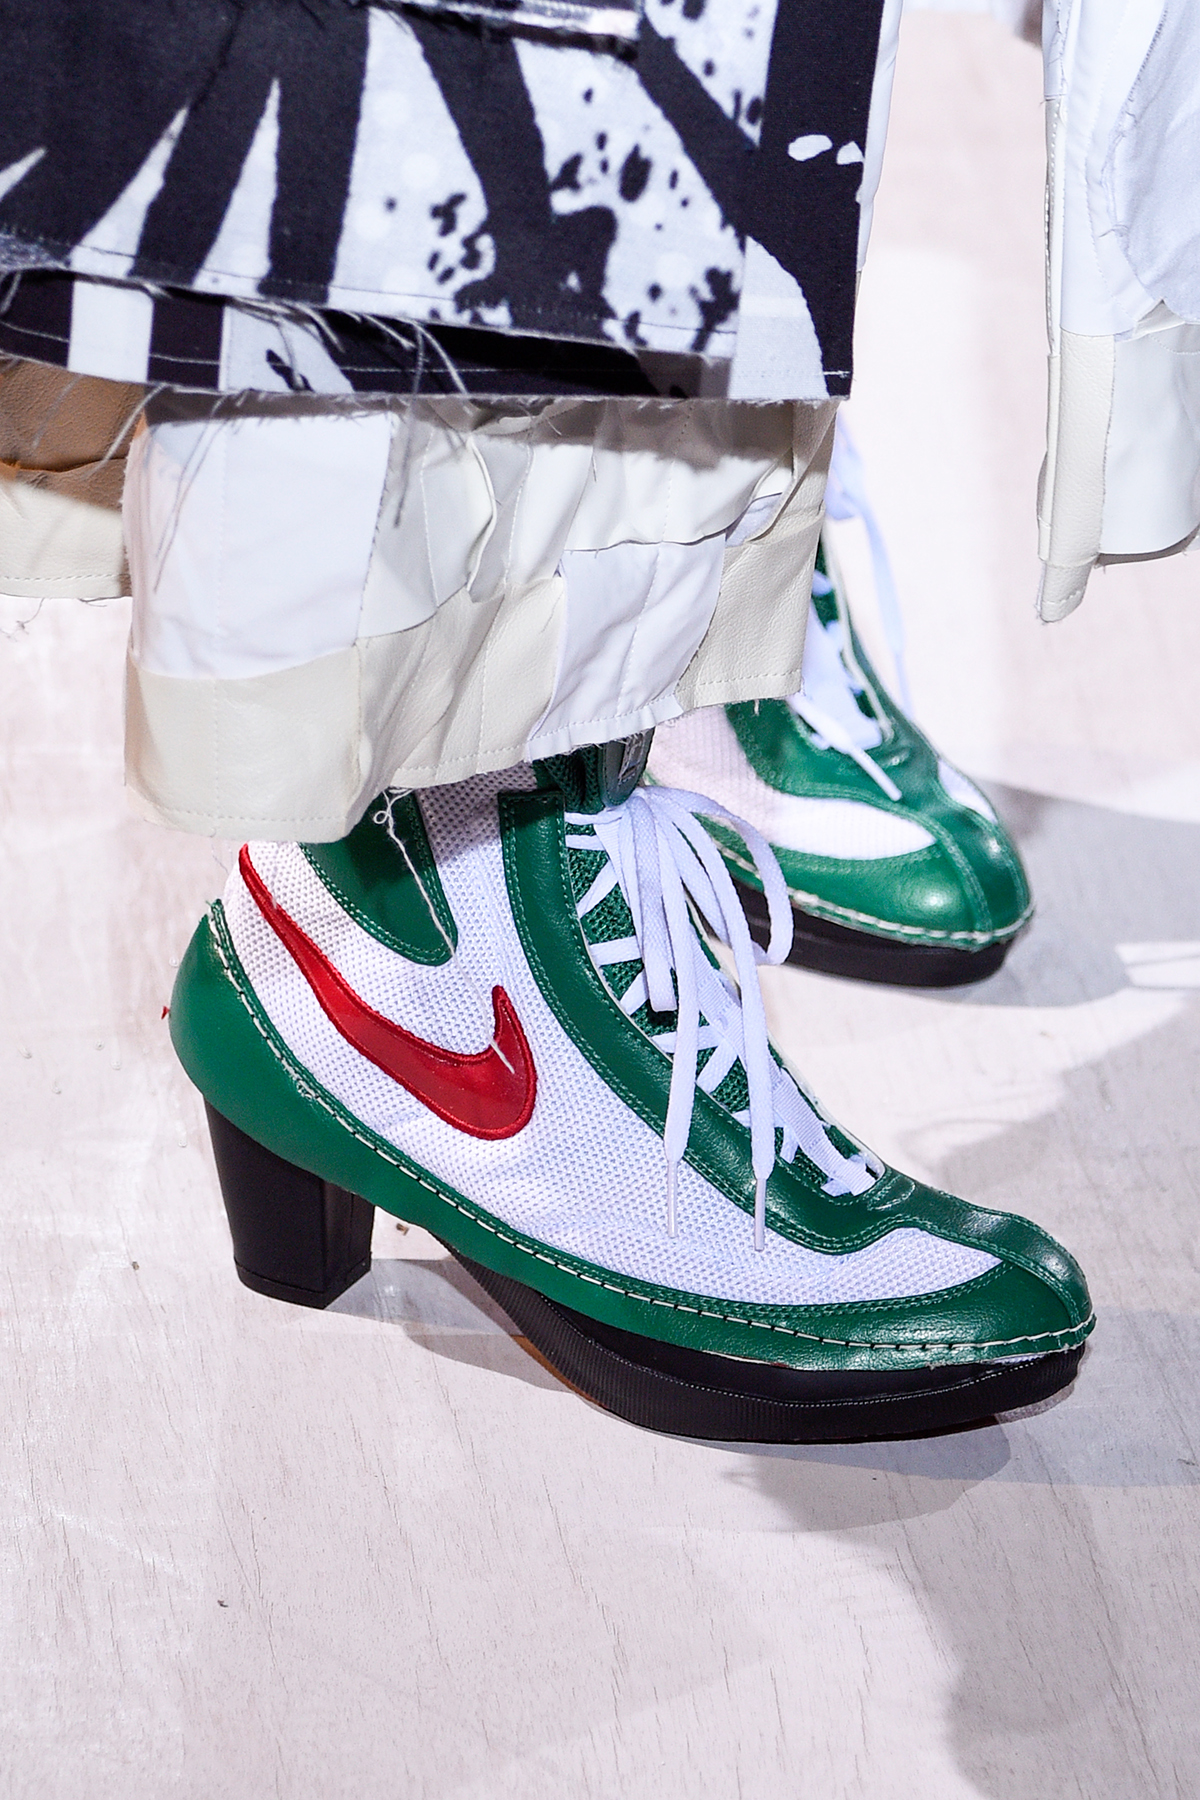 See Nike x Comme des Garçons' High-Heel Sneakers | Who What Wear